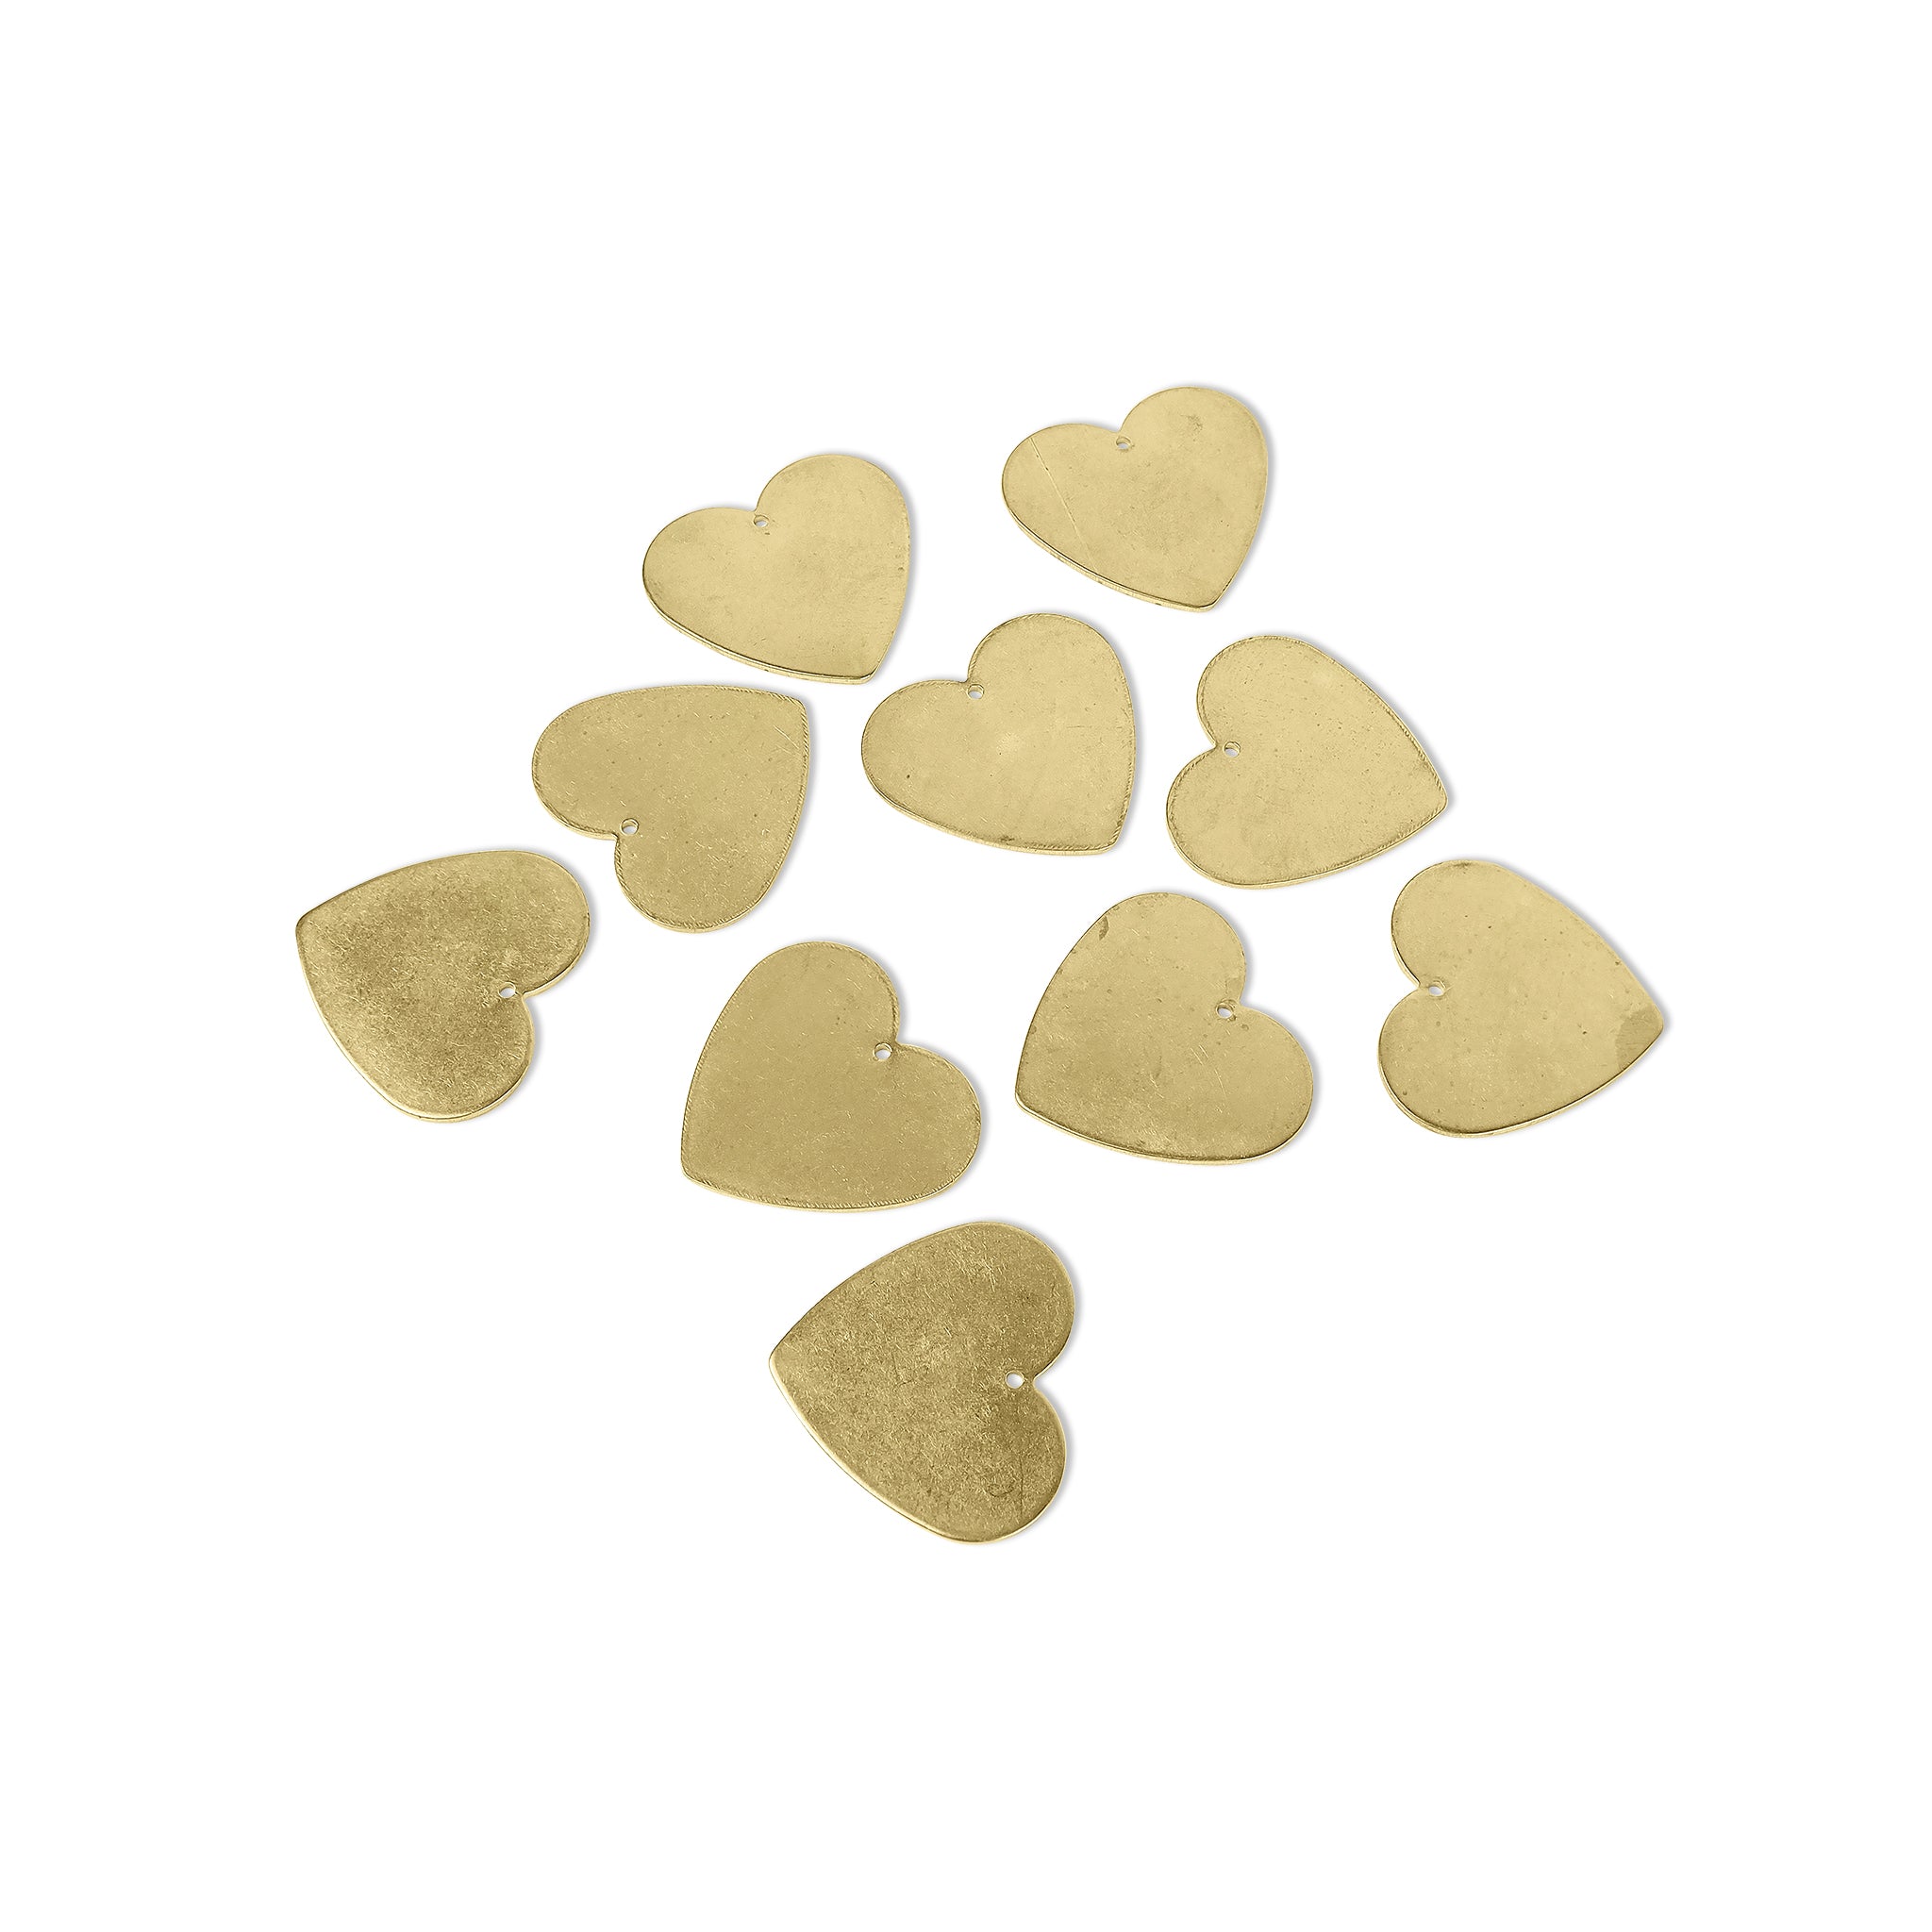 10 Pack - Brass Blank Rounded Heart Pendant With Hole / SBB0208